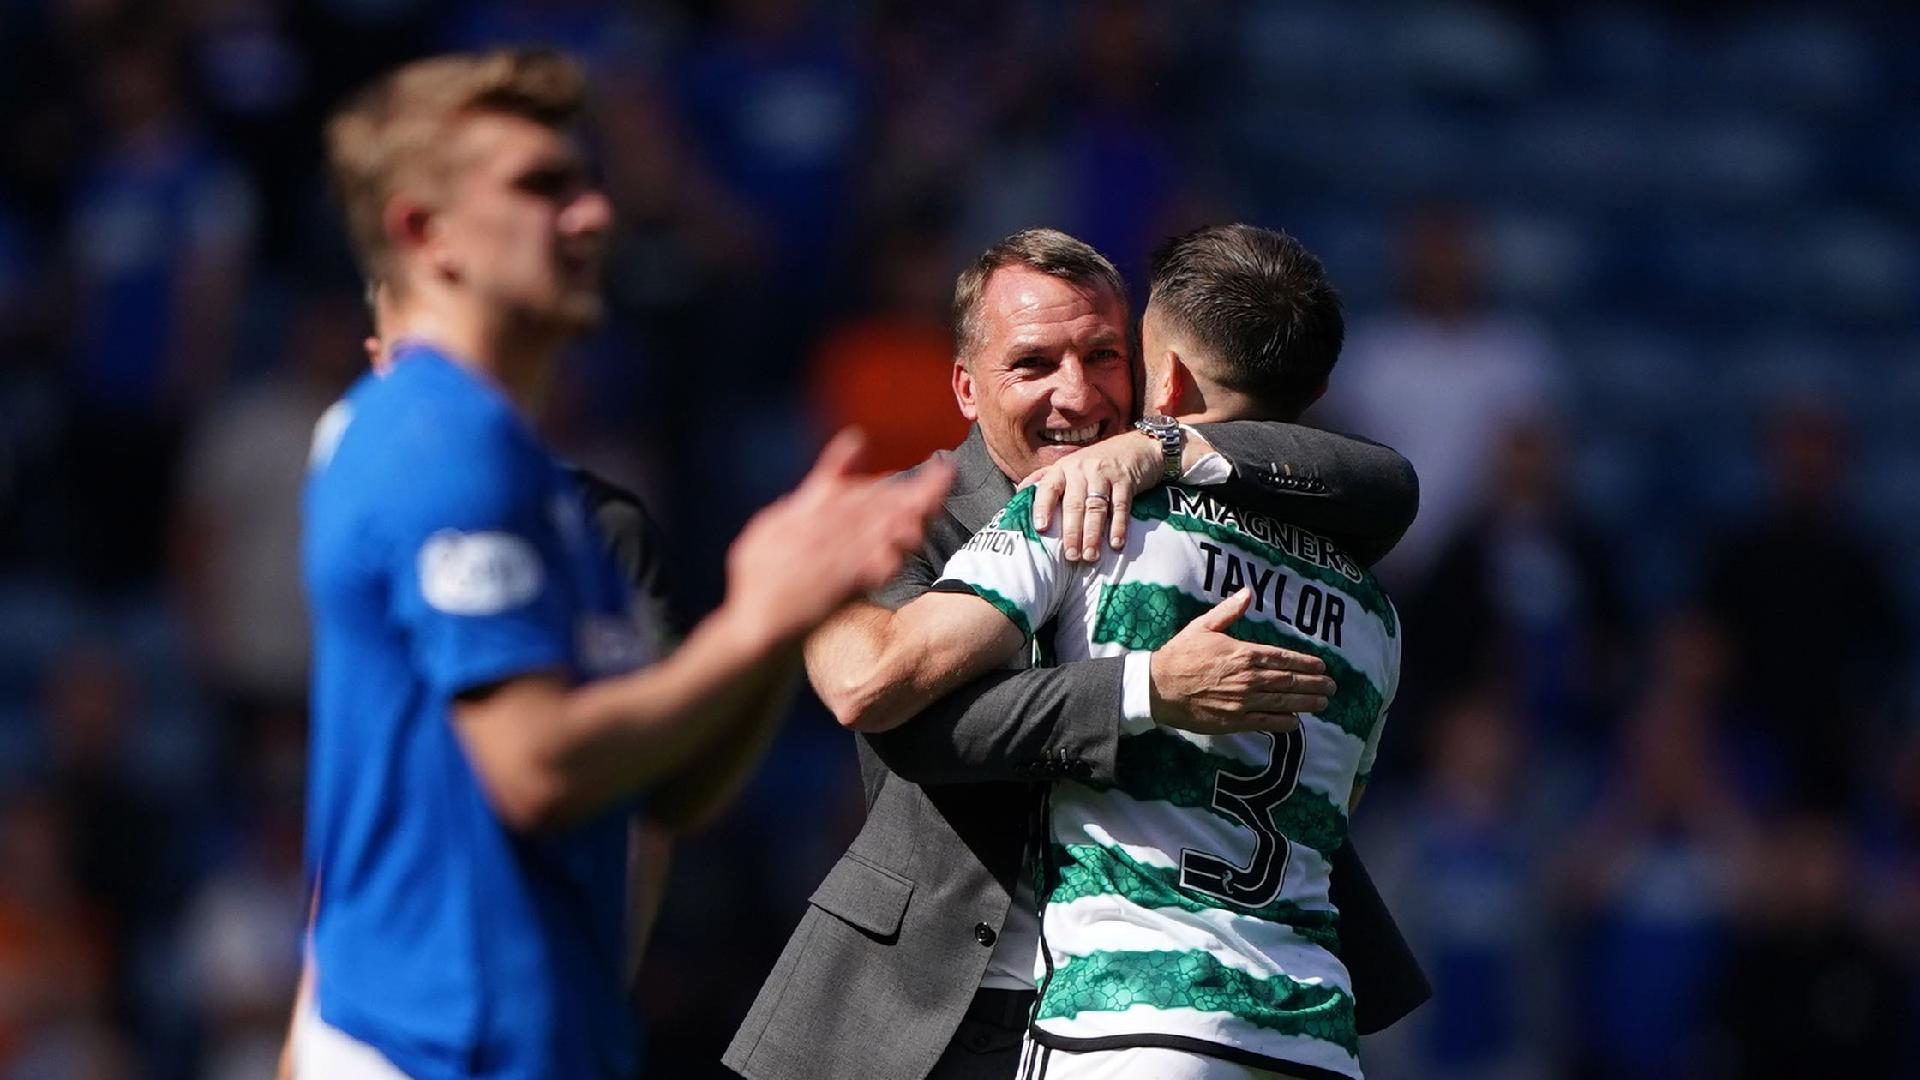 5 things we learned from this weekend’s Scottish Premiership action